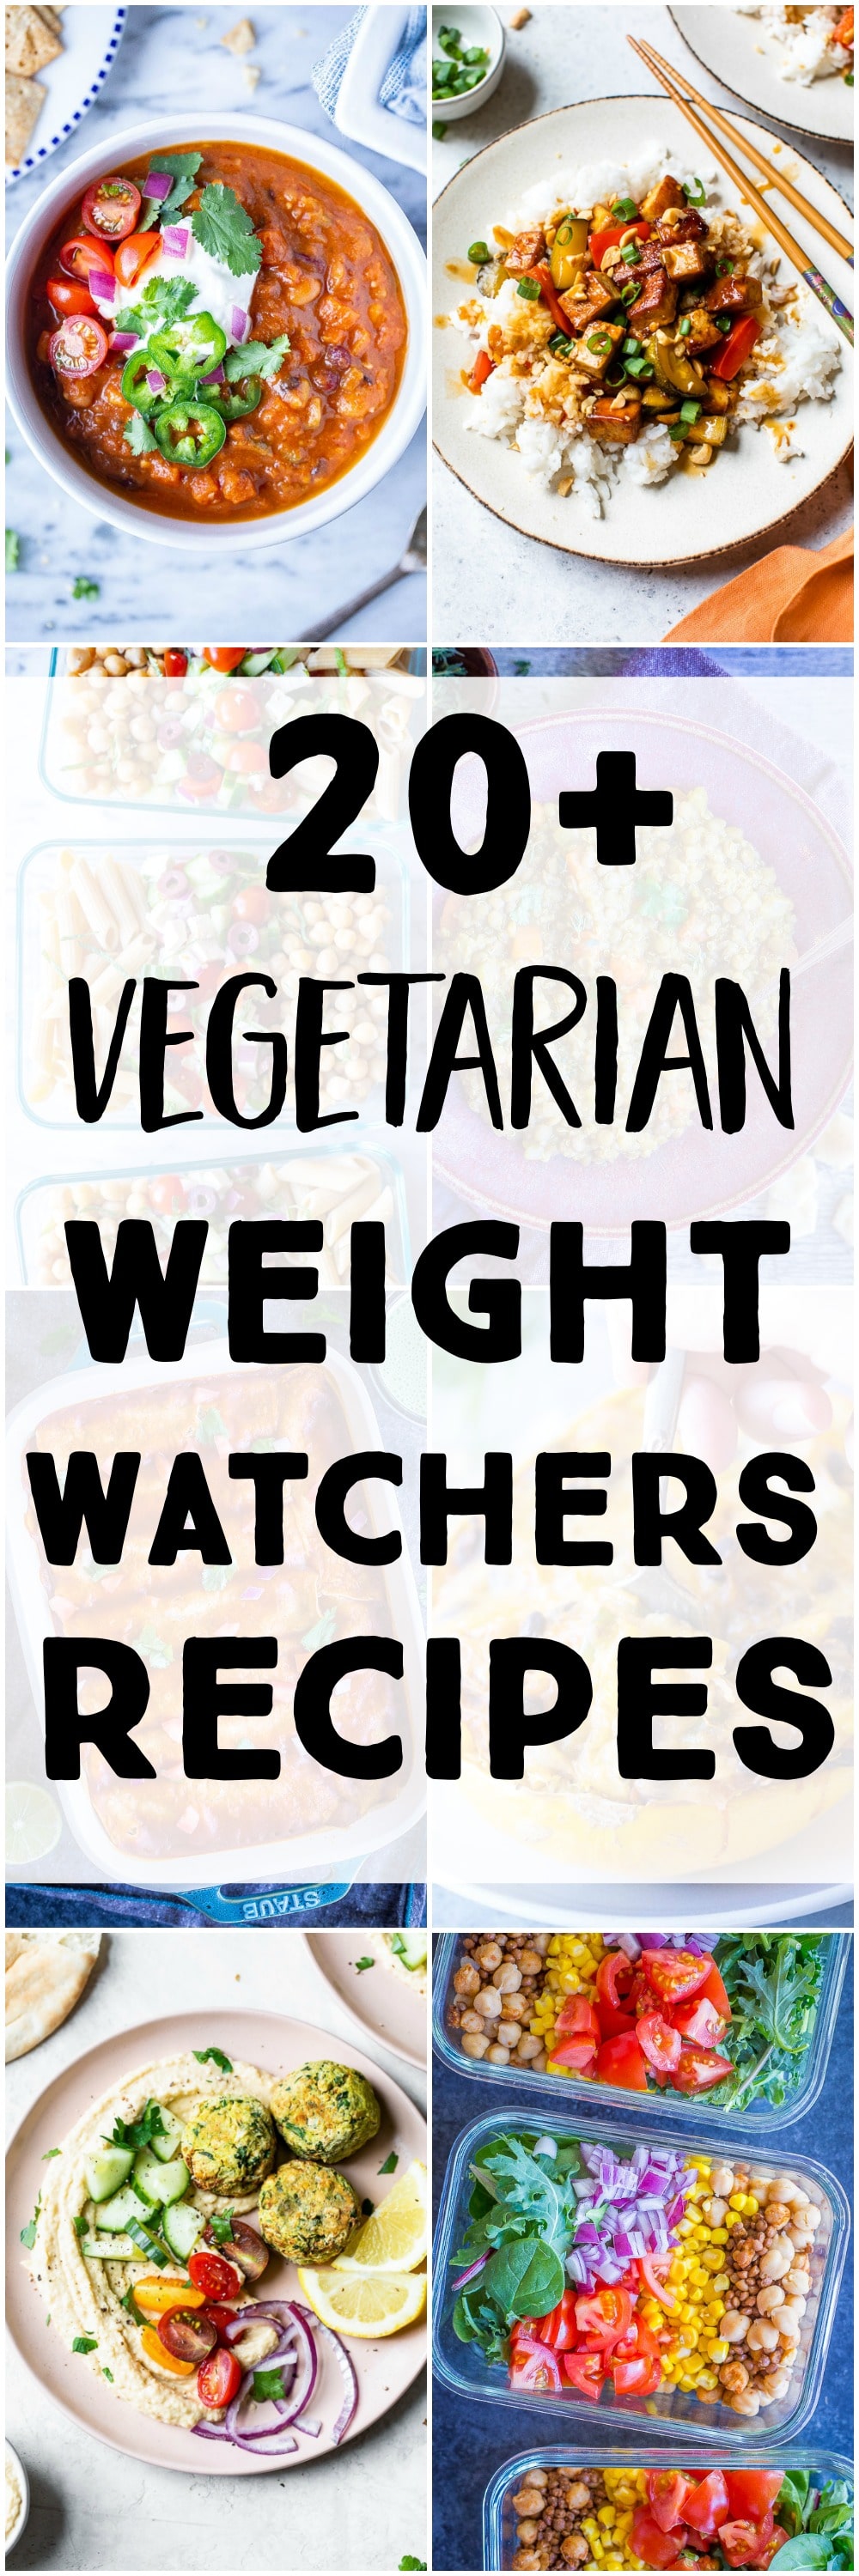 20 Vegetarian Weight Watchers Recipes - She Likes Food